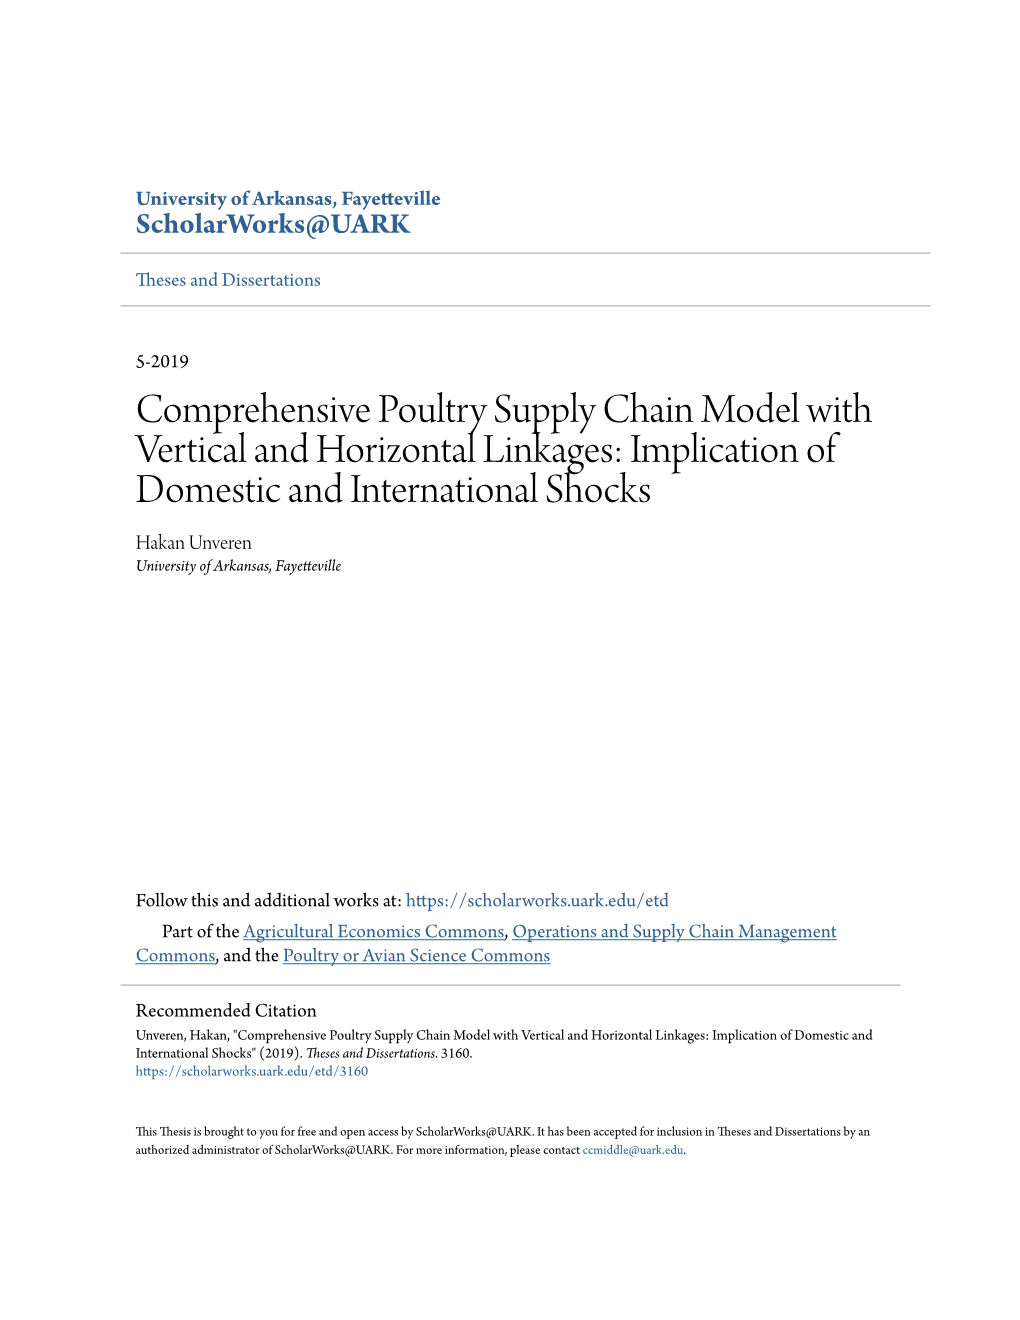 Comprehensive Poultry Supply Chain Model with Vertical and Horizontal Linkages